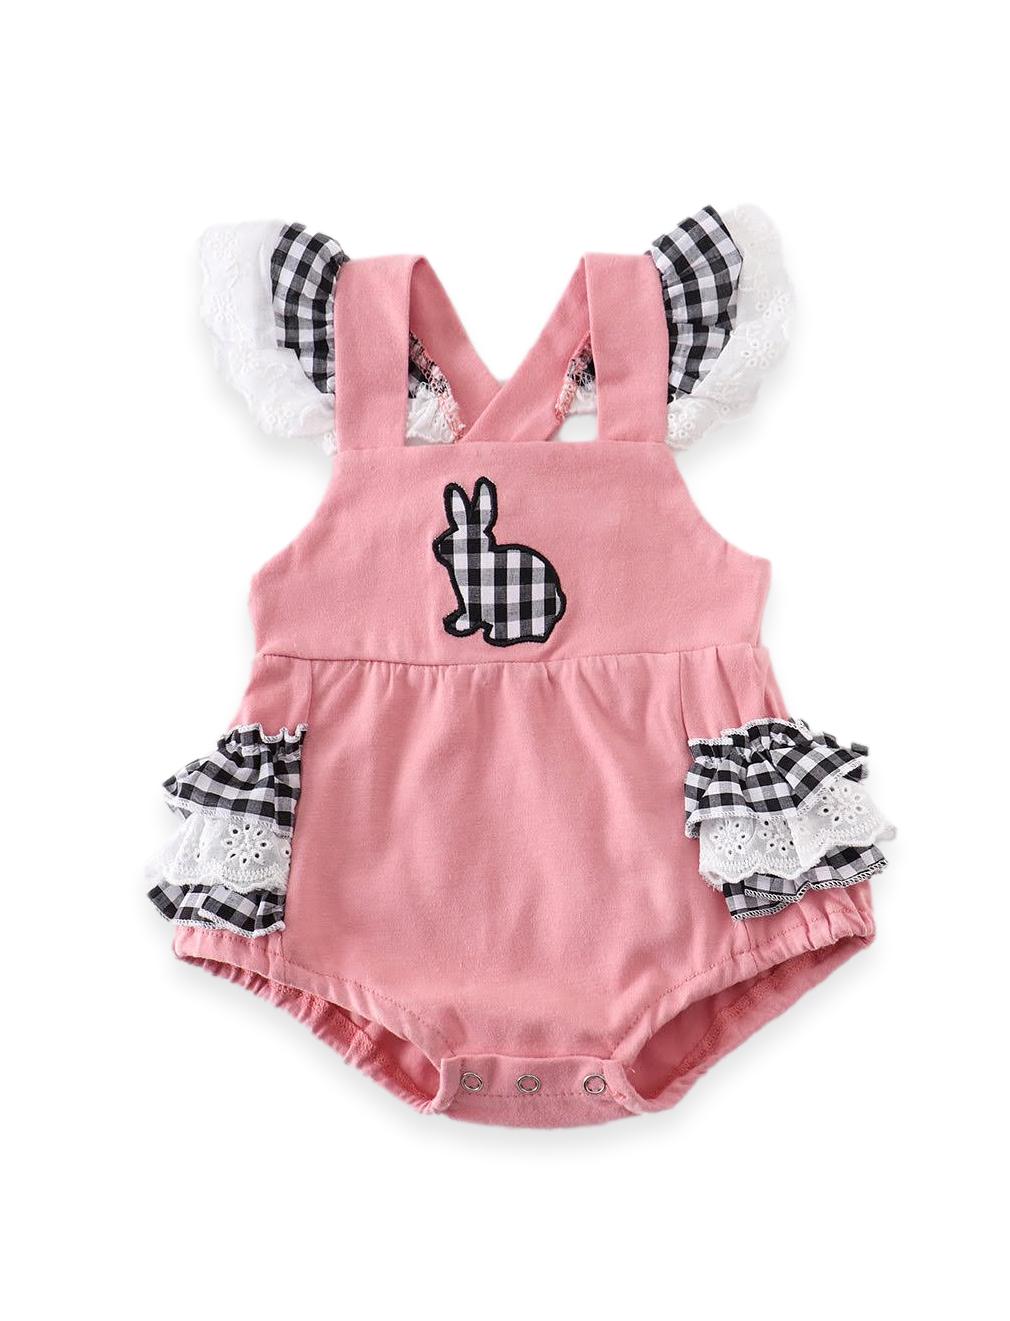 Dusky Pink Gingham Plaid Bunny Lace Baby Romper - ARIA KIDS